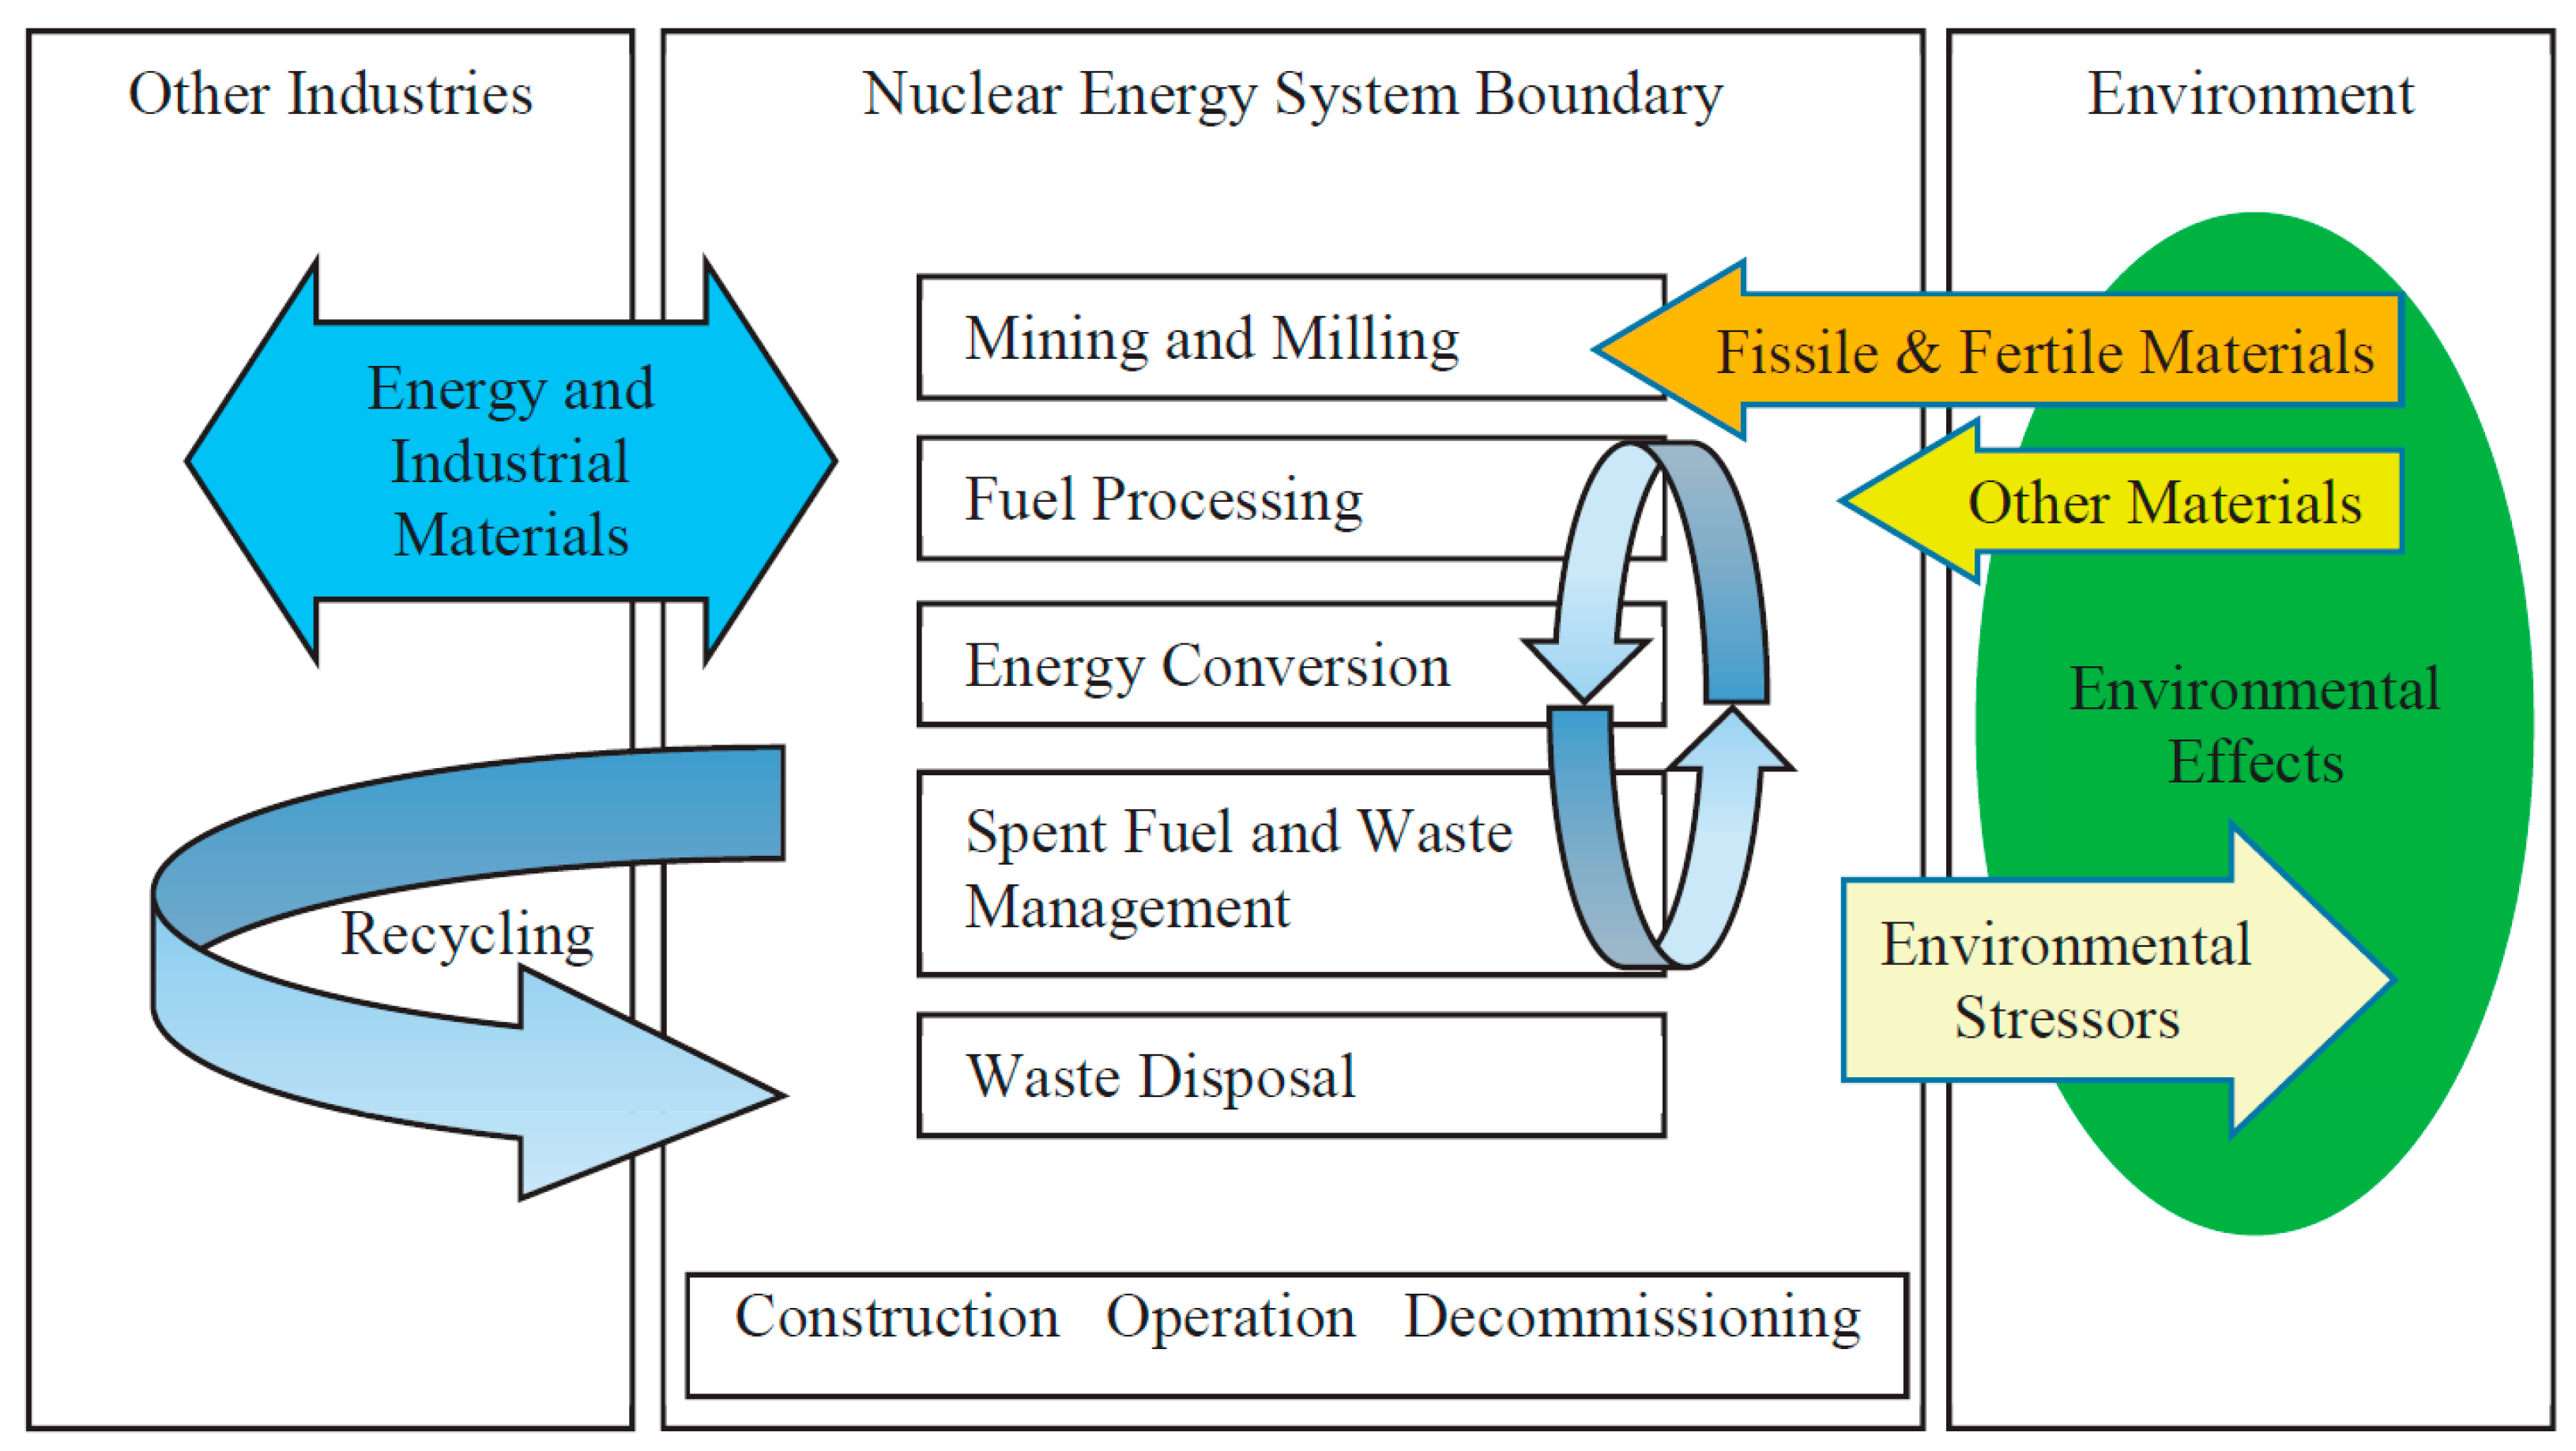 II. Understanding the Basics of Nuclear Energy